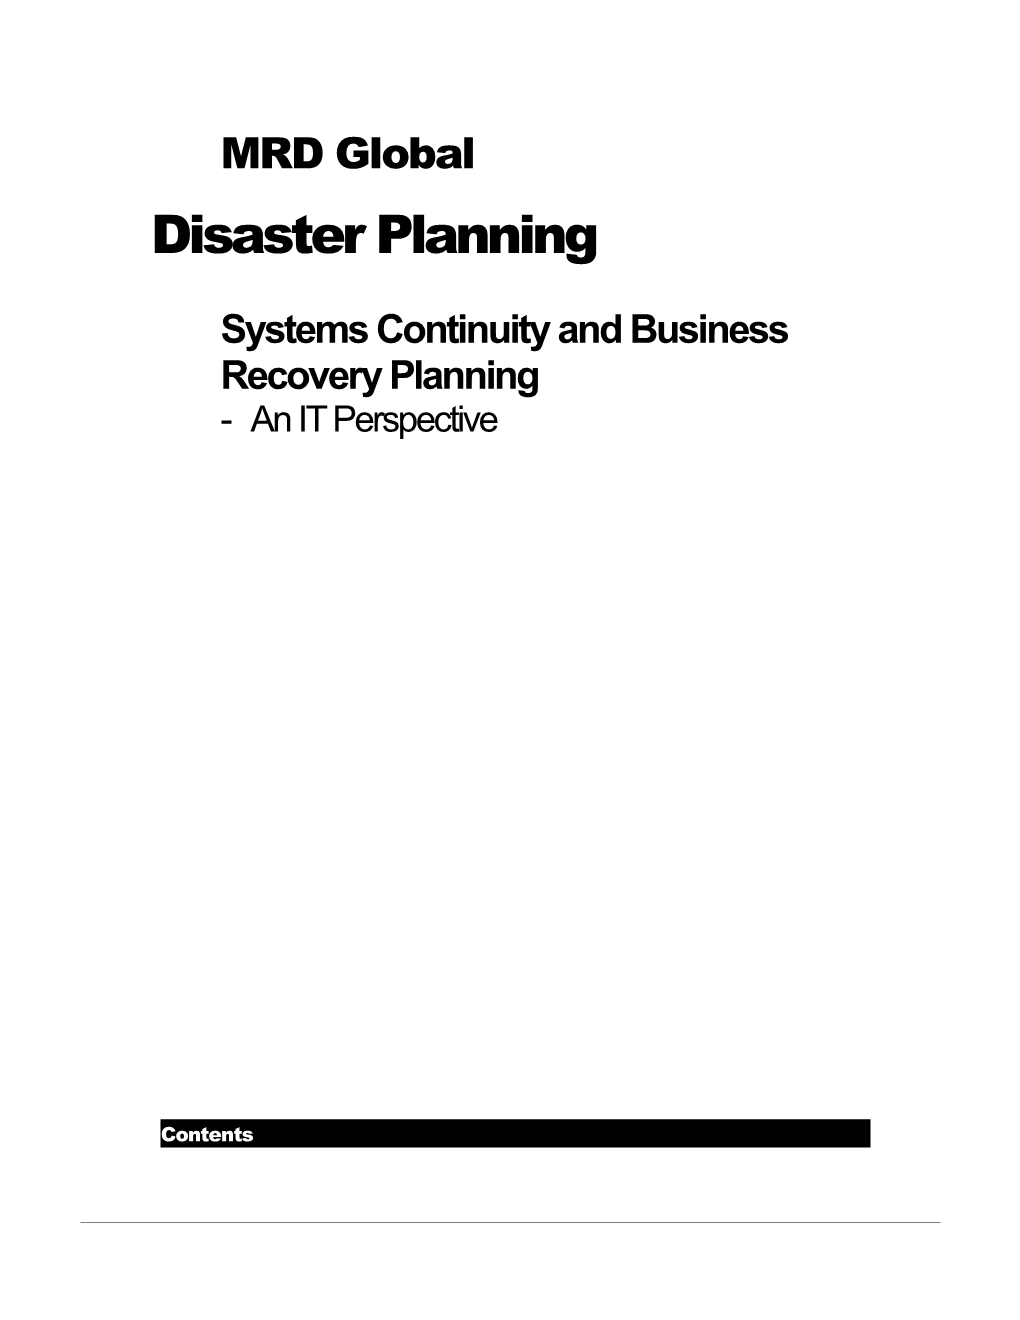 Systems Continuity and Business Recovery Planning